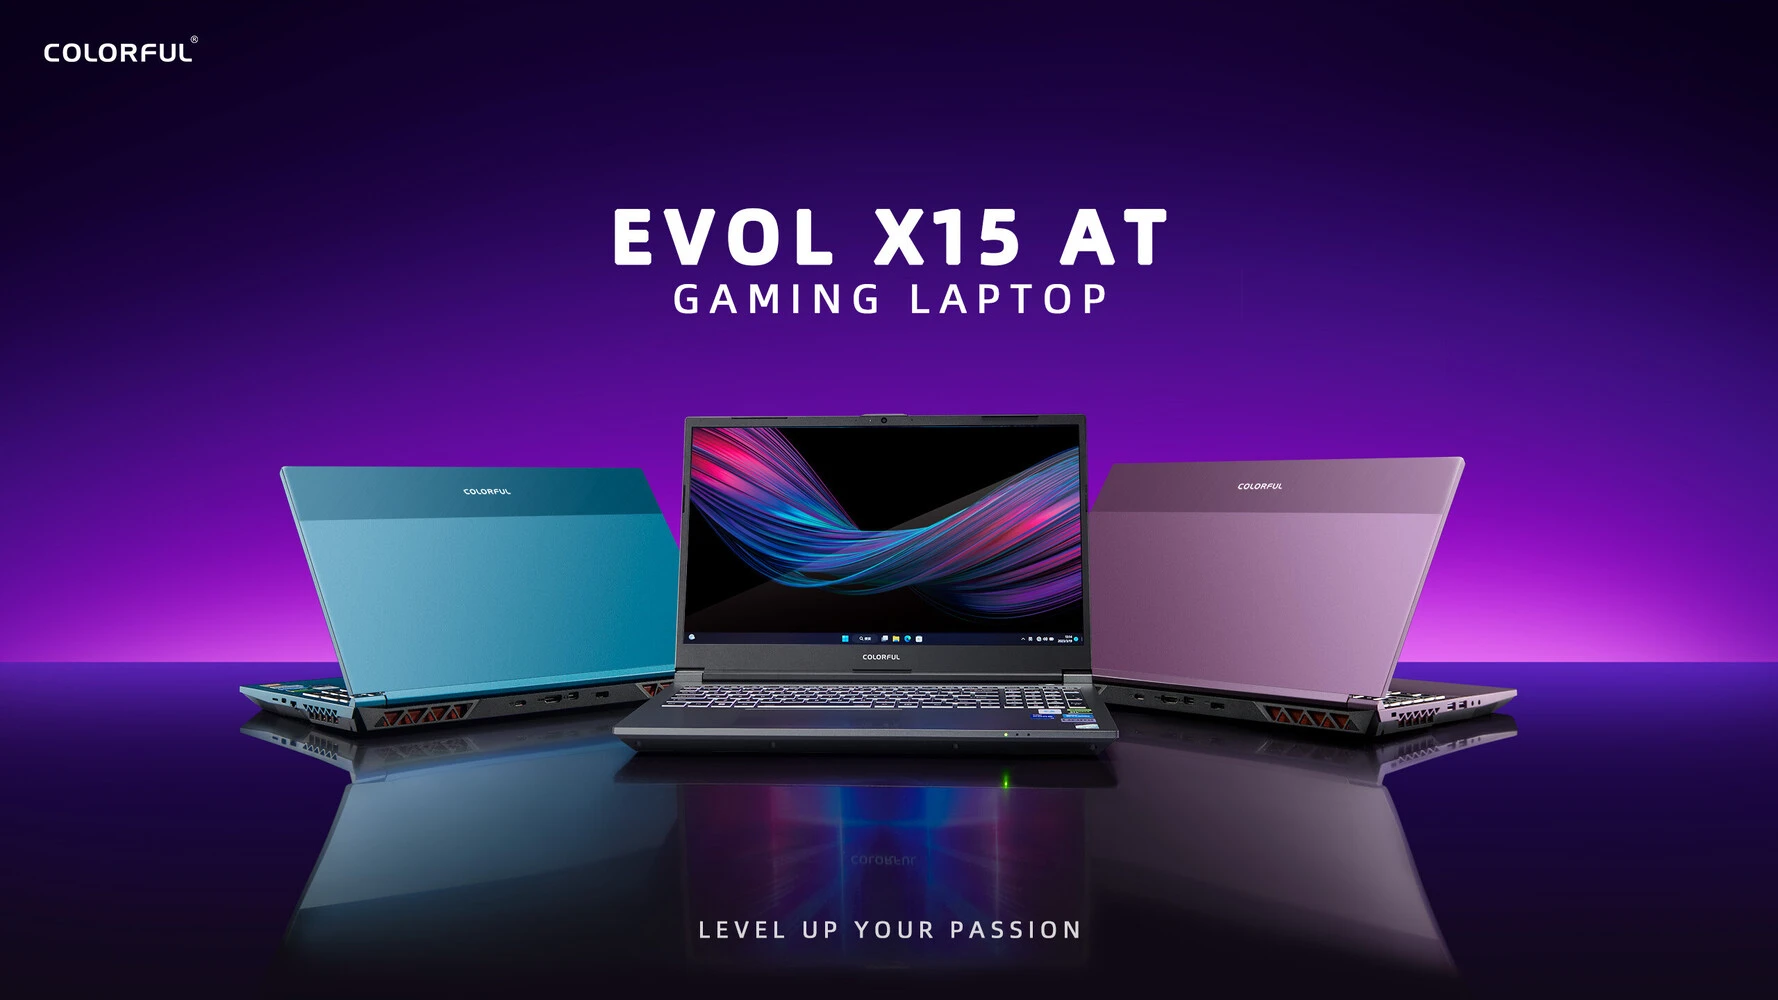 Colorful launches the entry-level gaming laptop Evol X15 AT